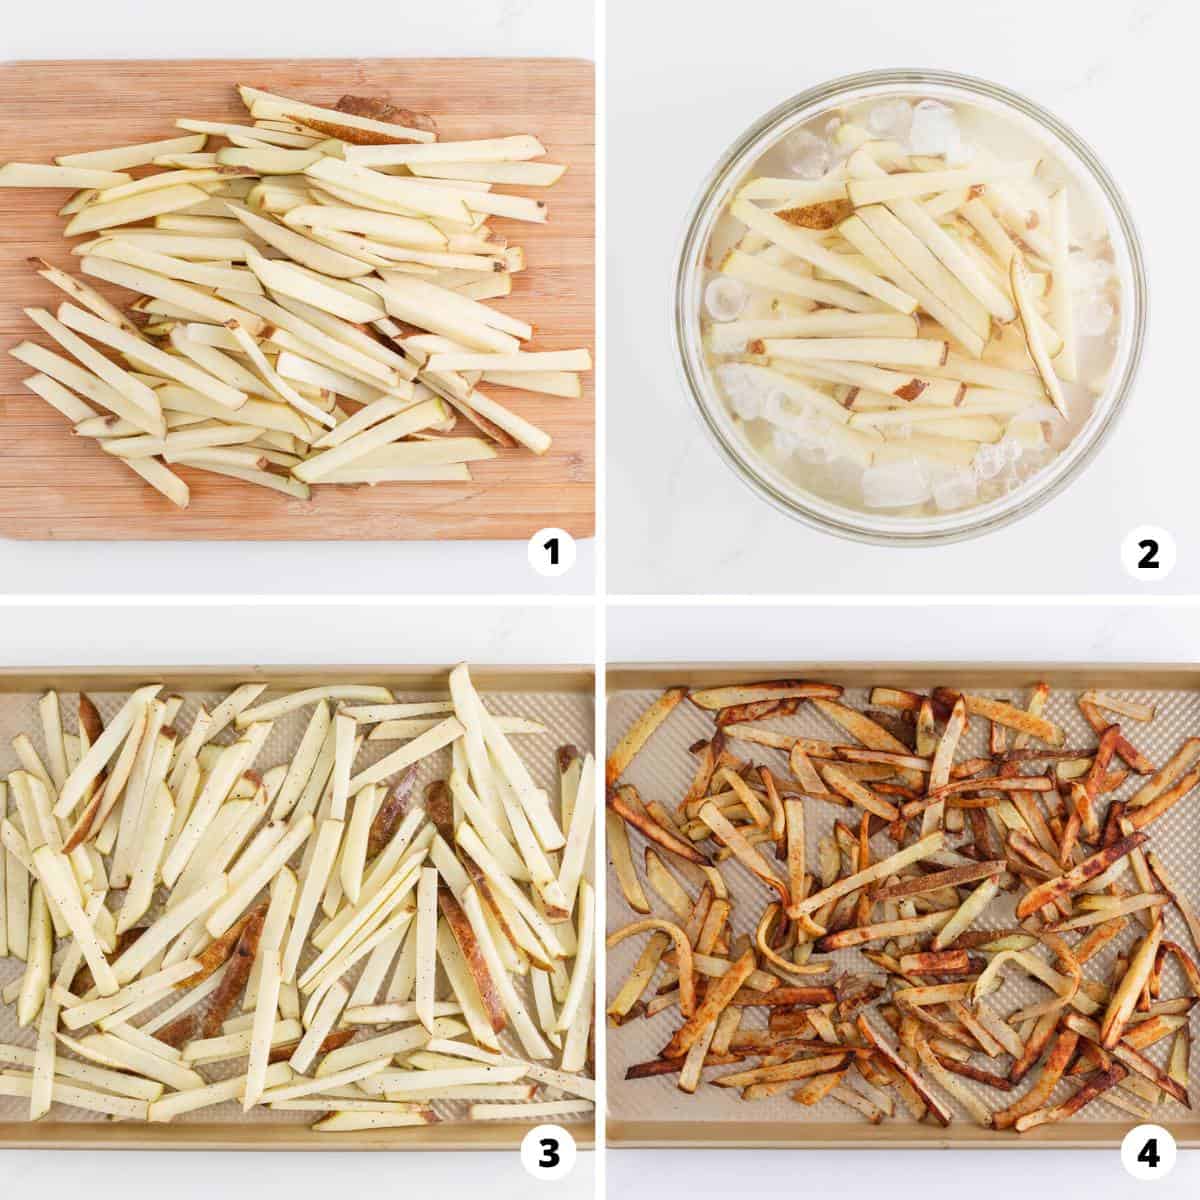 Showing how to make french fries in a 4 step collage.